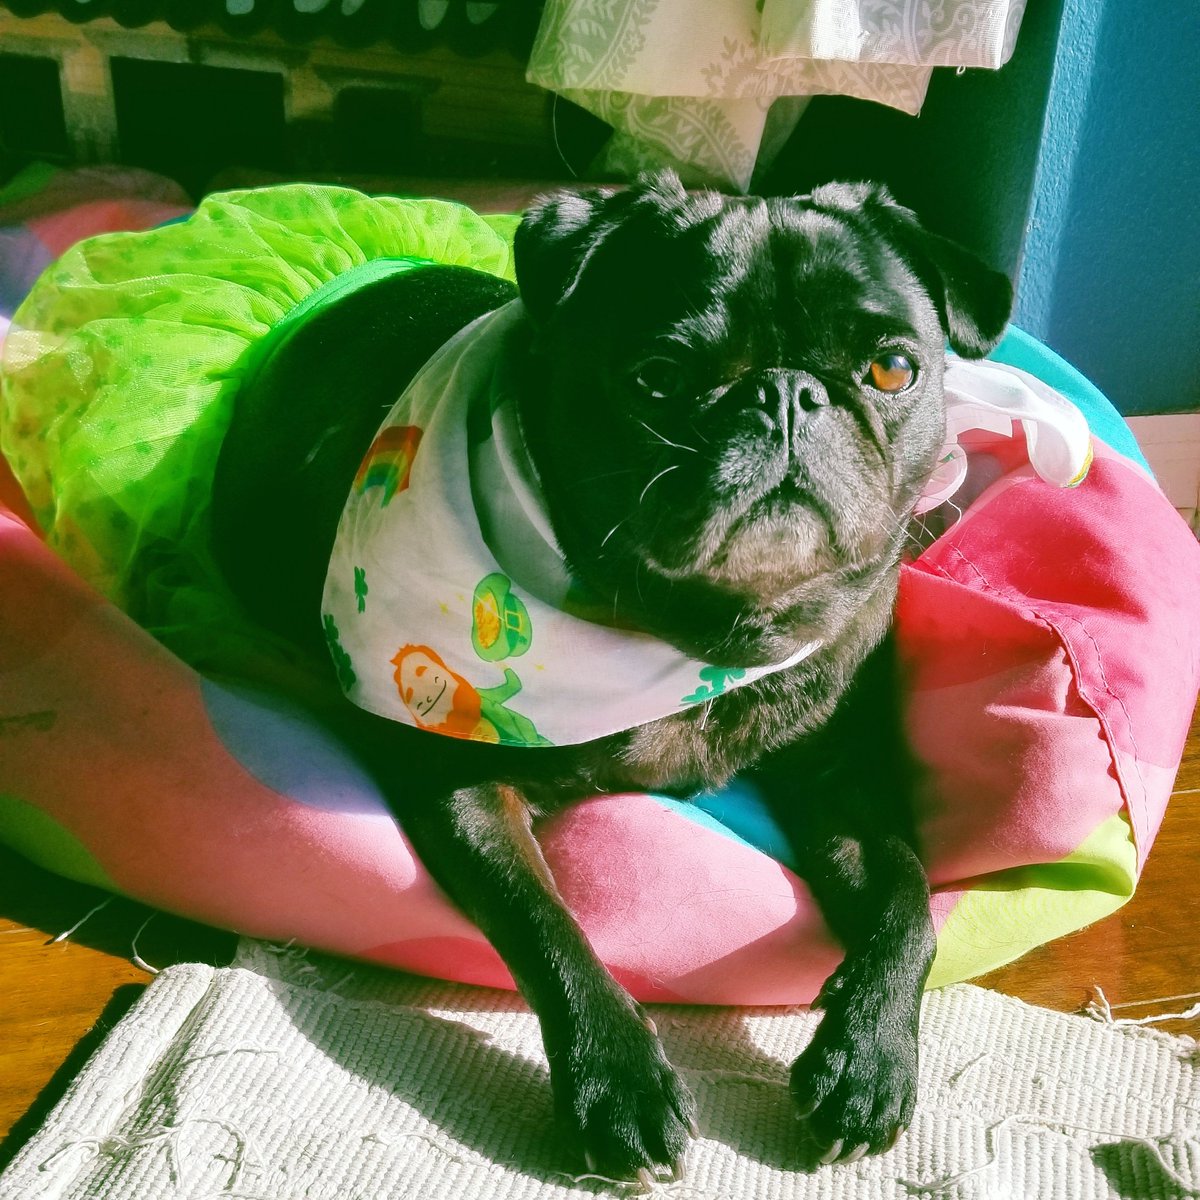 Who needs luck? 🍀 Me has charm! Happy St. Patrick's Day! 🌈🍀🥰💚🥰🍀🌈

#pug #pugs #dogsoftwitter #dog #dogs #StPatricksDay #StPatricksDaySlam #stpatricksday2022 #stpatricksdayparade #StPaddysDay #StPatrickDay #StPatricksFestival